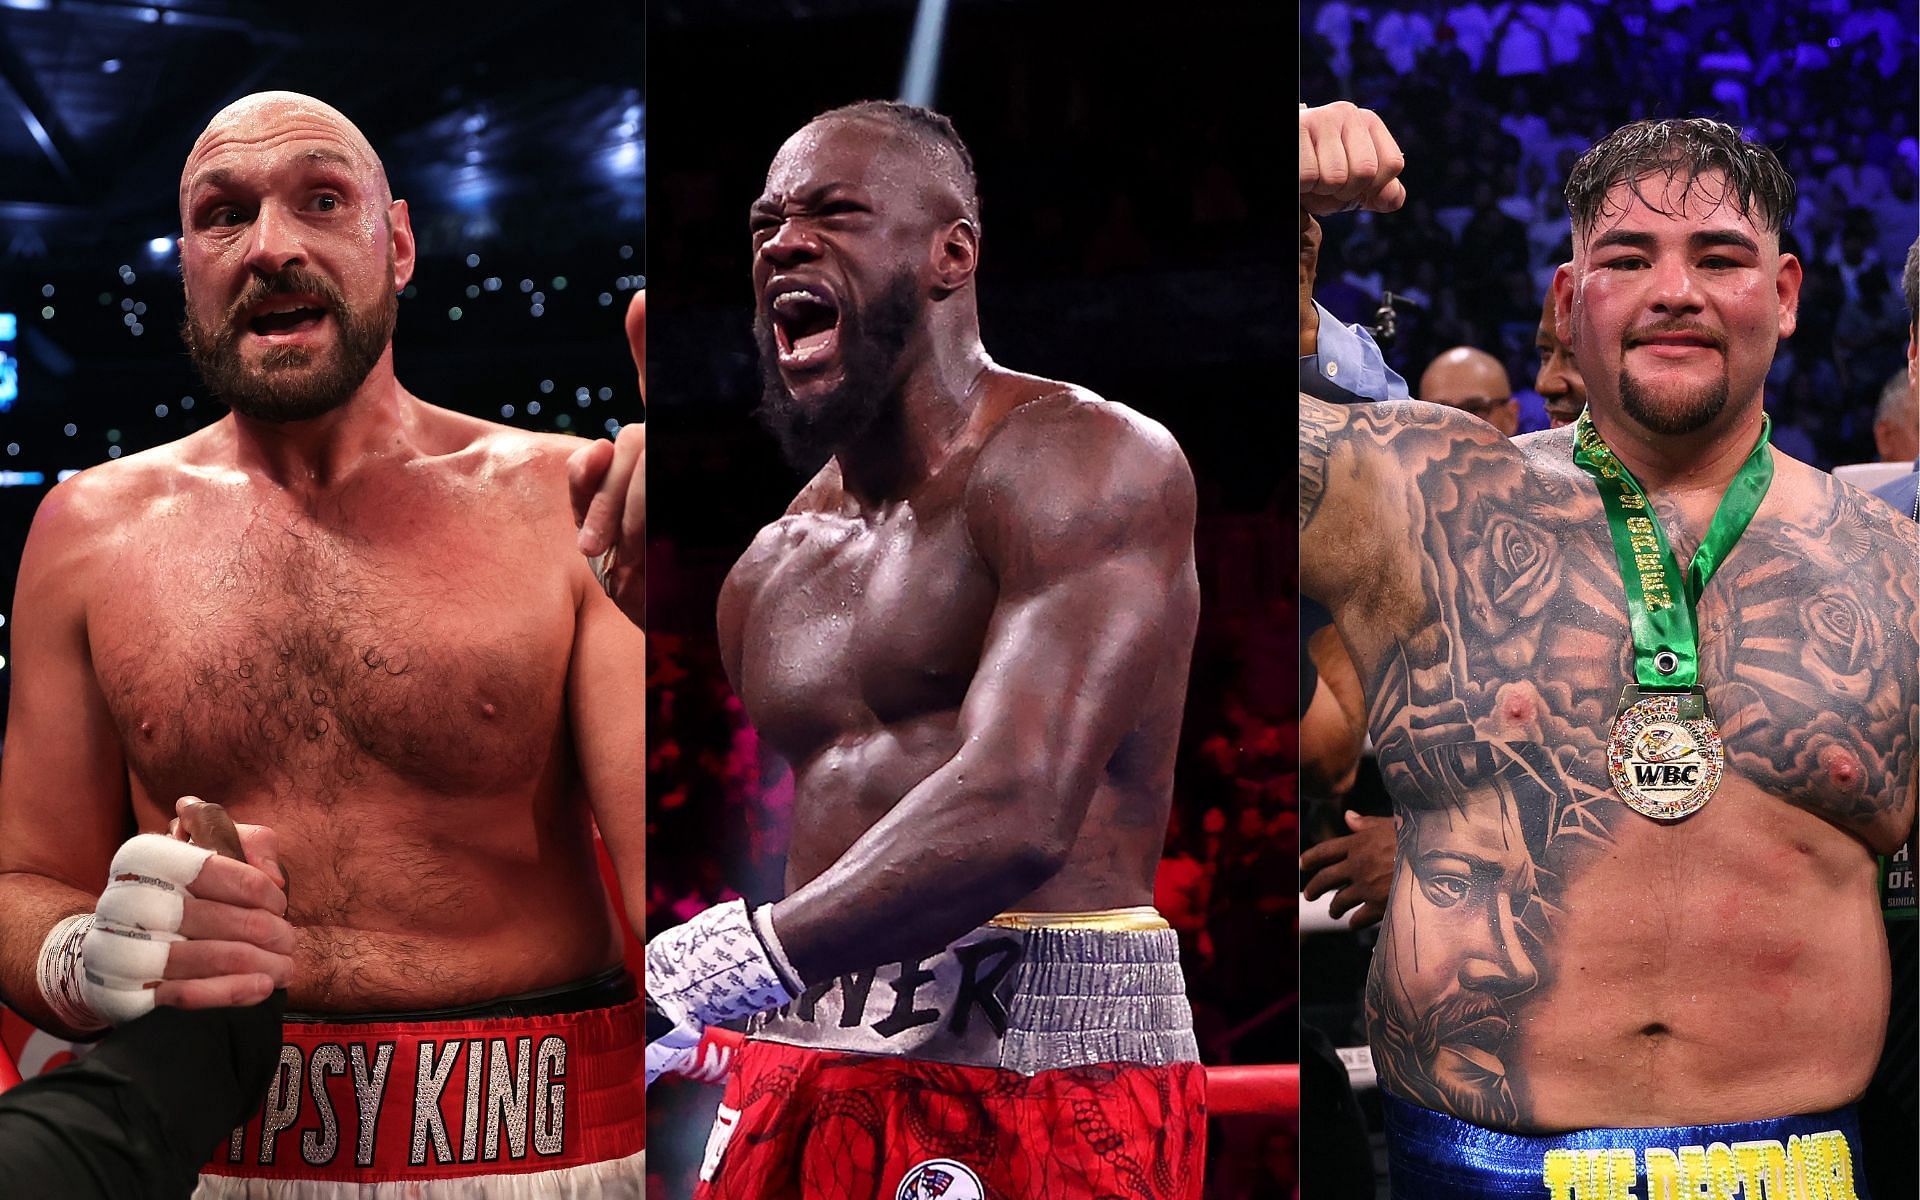 Tyson Fury (left), Deontay Wilder (center), and Andy Ruiz Jr. (right) (Image credits Getty Images)